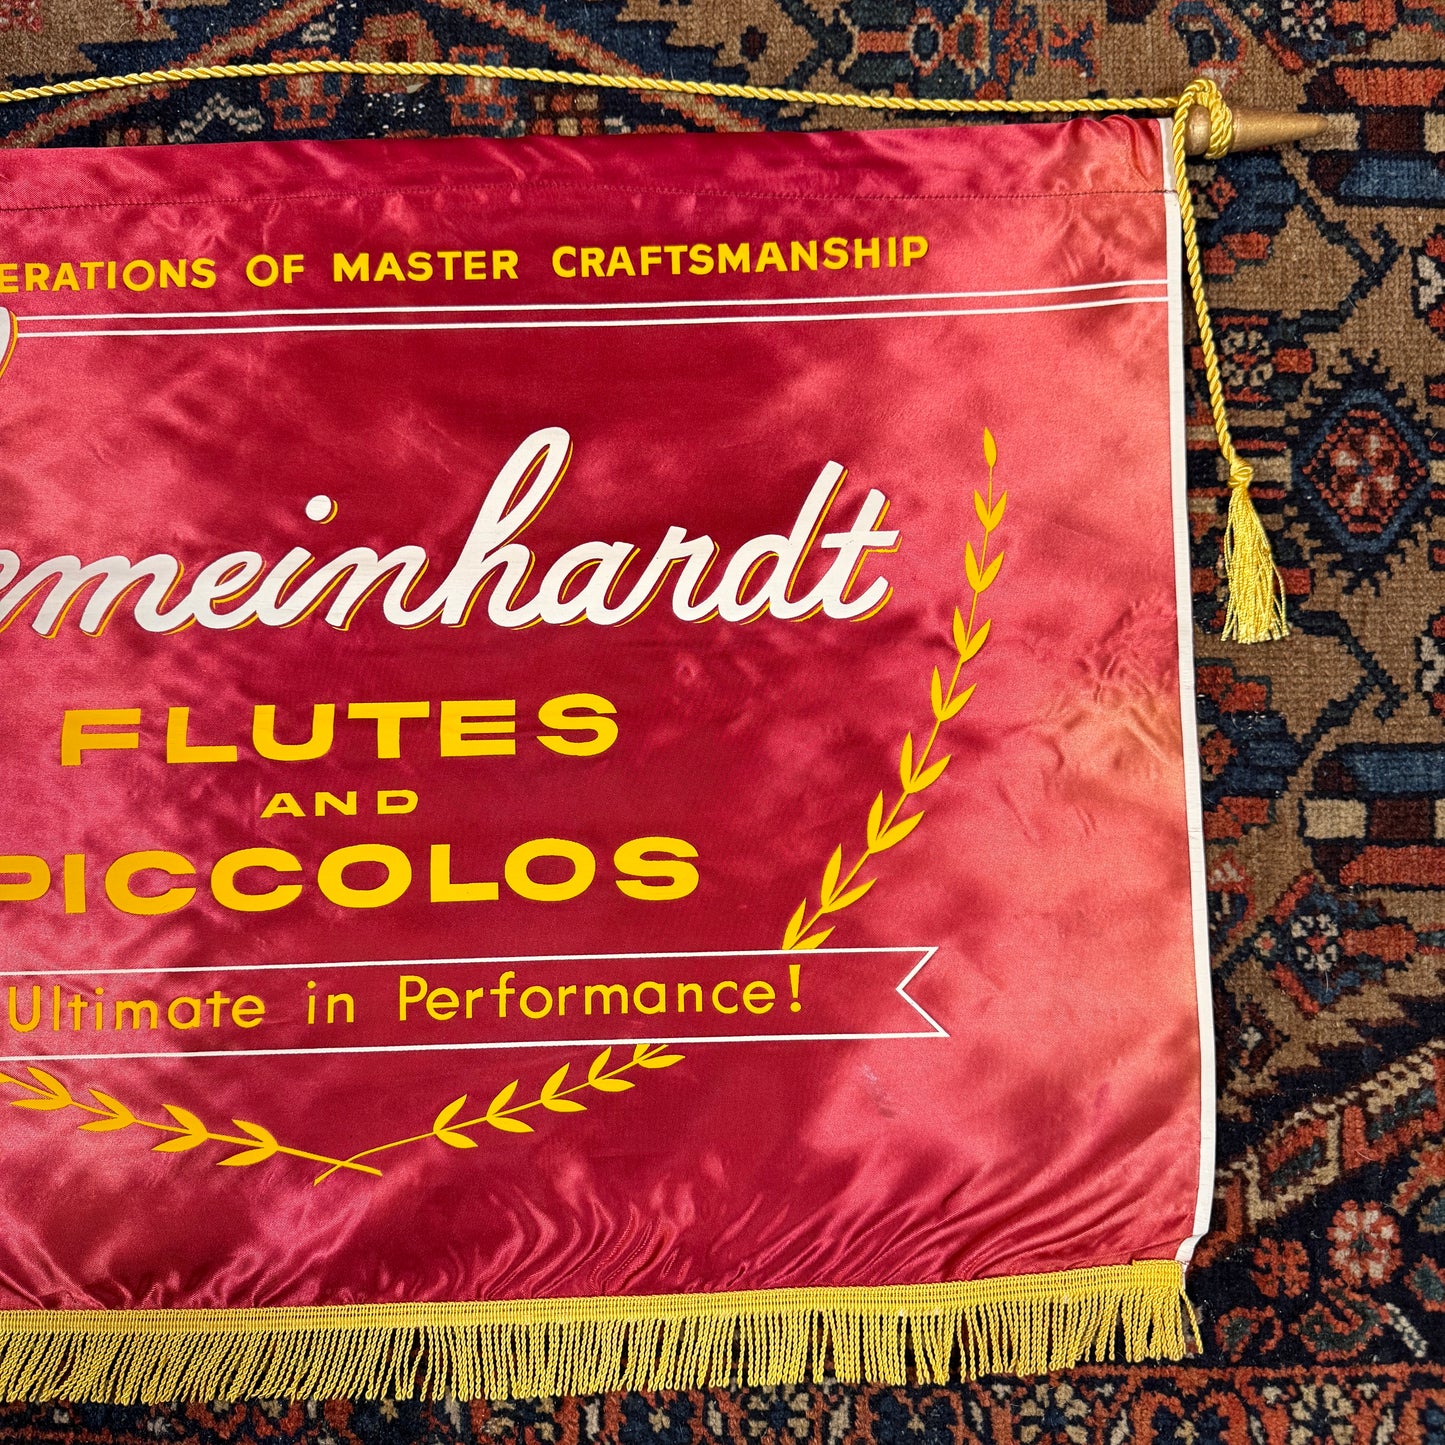 Gemeinhardt Flutes & Piccolos 28" x 17" Cloth Banner Red and Gold